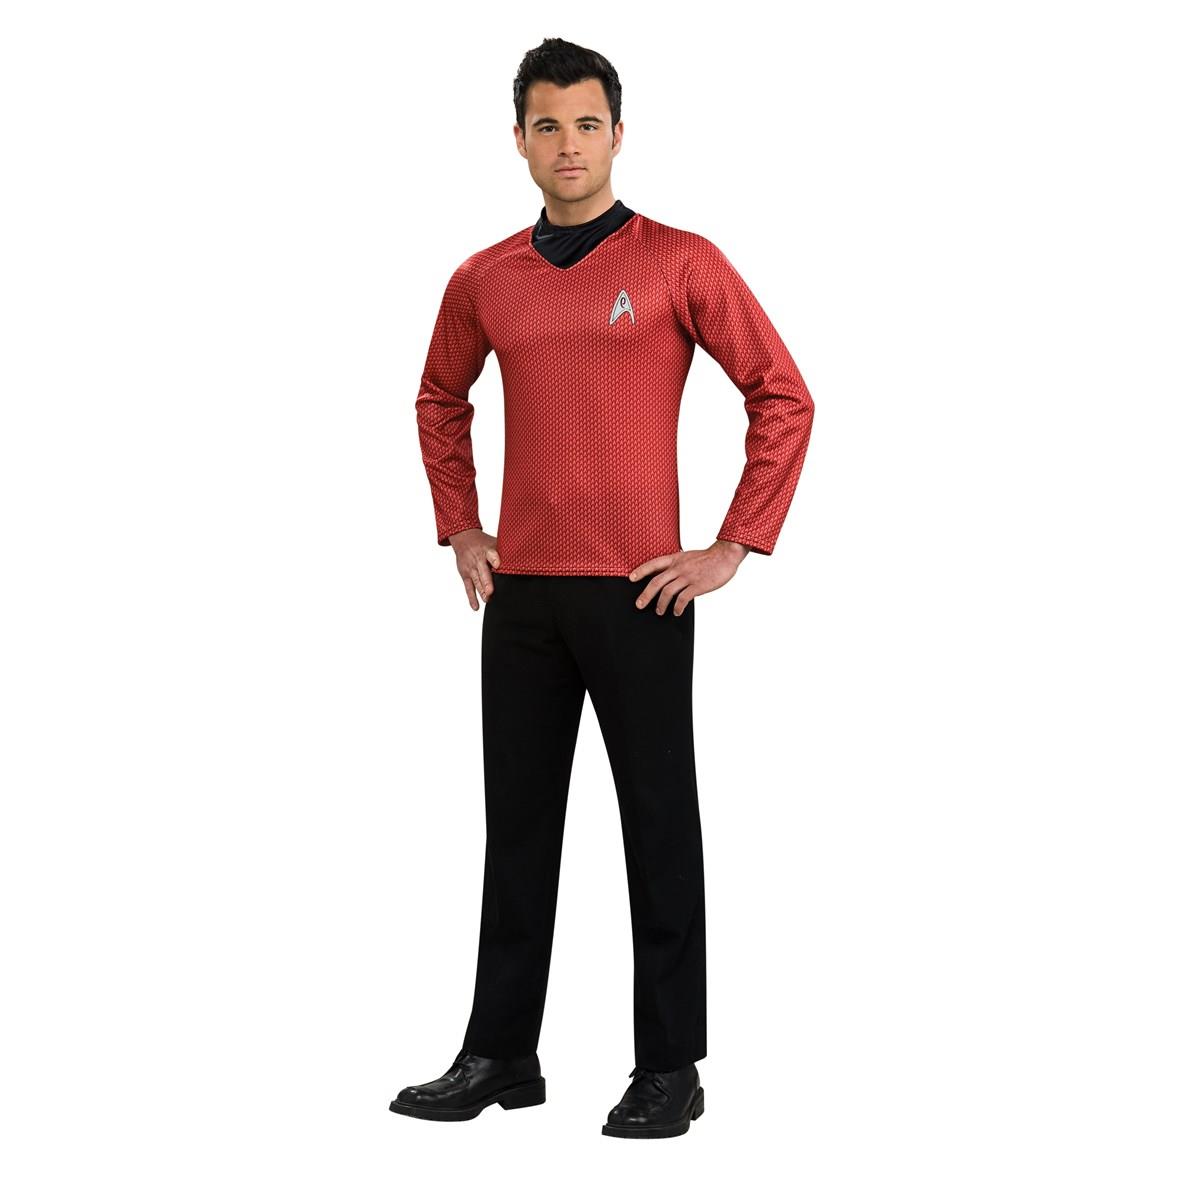 Picture of Rubies Costumes 281177 Star Trek Movie 2009 - Red Shirt Adult Costume - Small